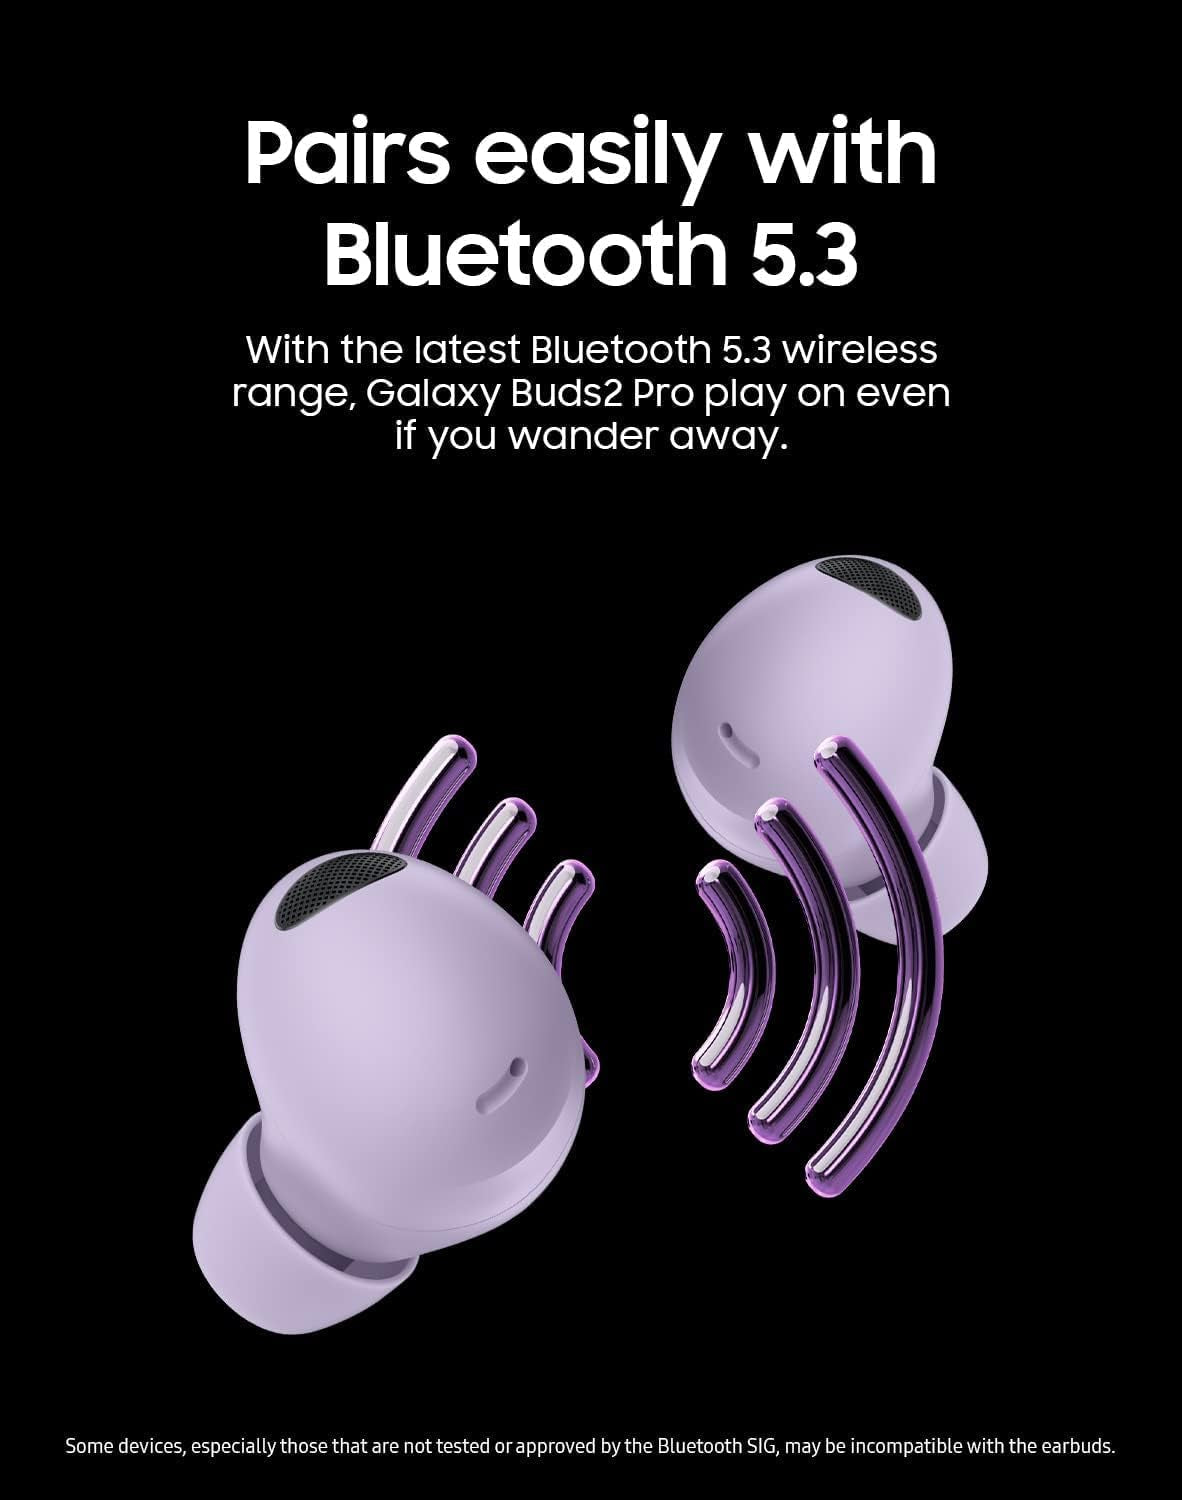 Samsung Galaxy Buds 2 Pro True Wireless Bluetooth Earbuds, Noise Cancelling, Hi-Fi Sound, 360 Audio, Comfort in Ear Fit, HD Voice, Conversation Mode, IPX7 Water Resistant, US Version, Bora Purple